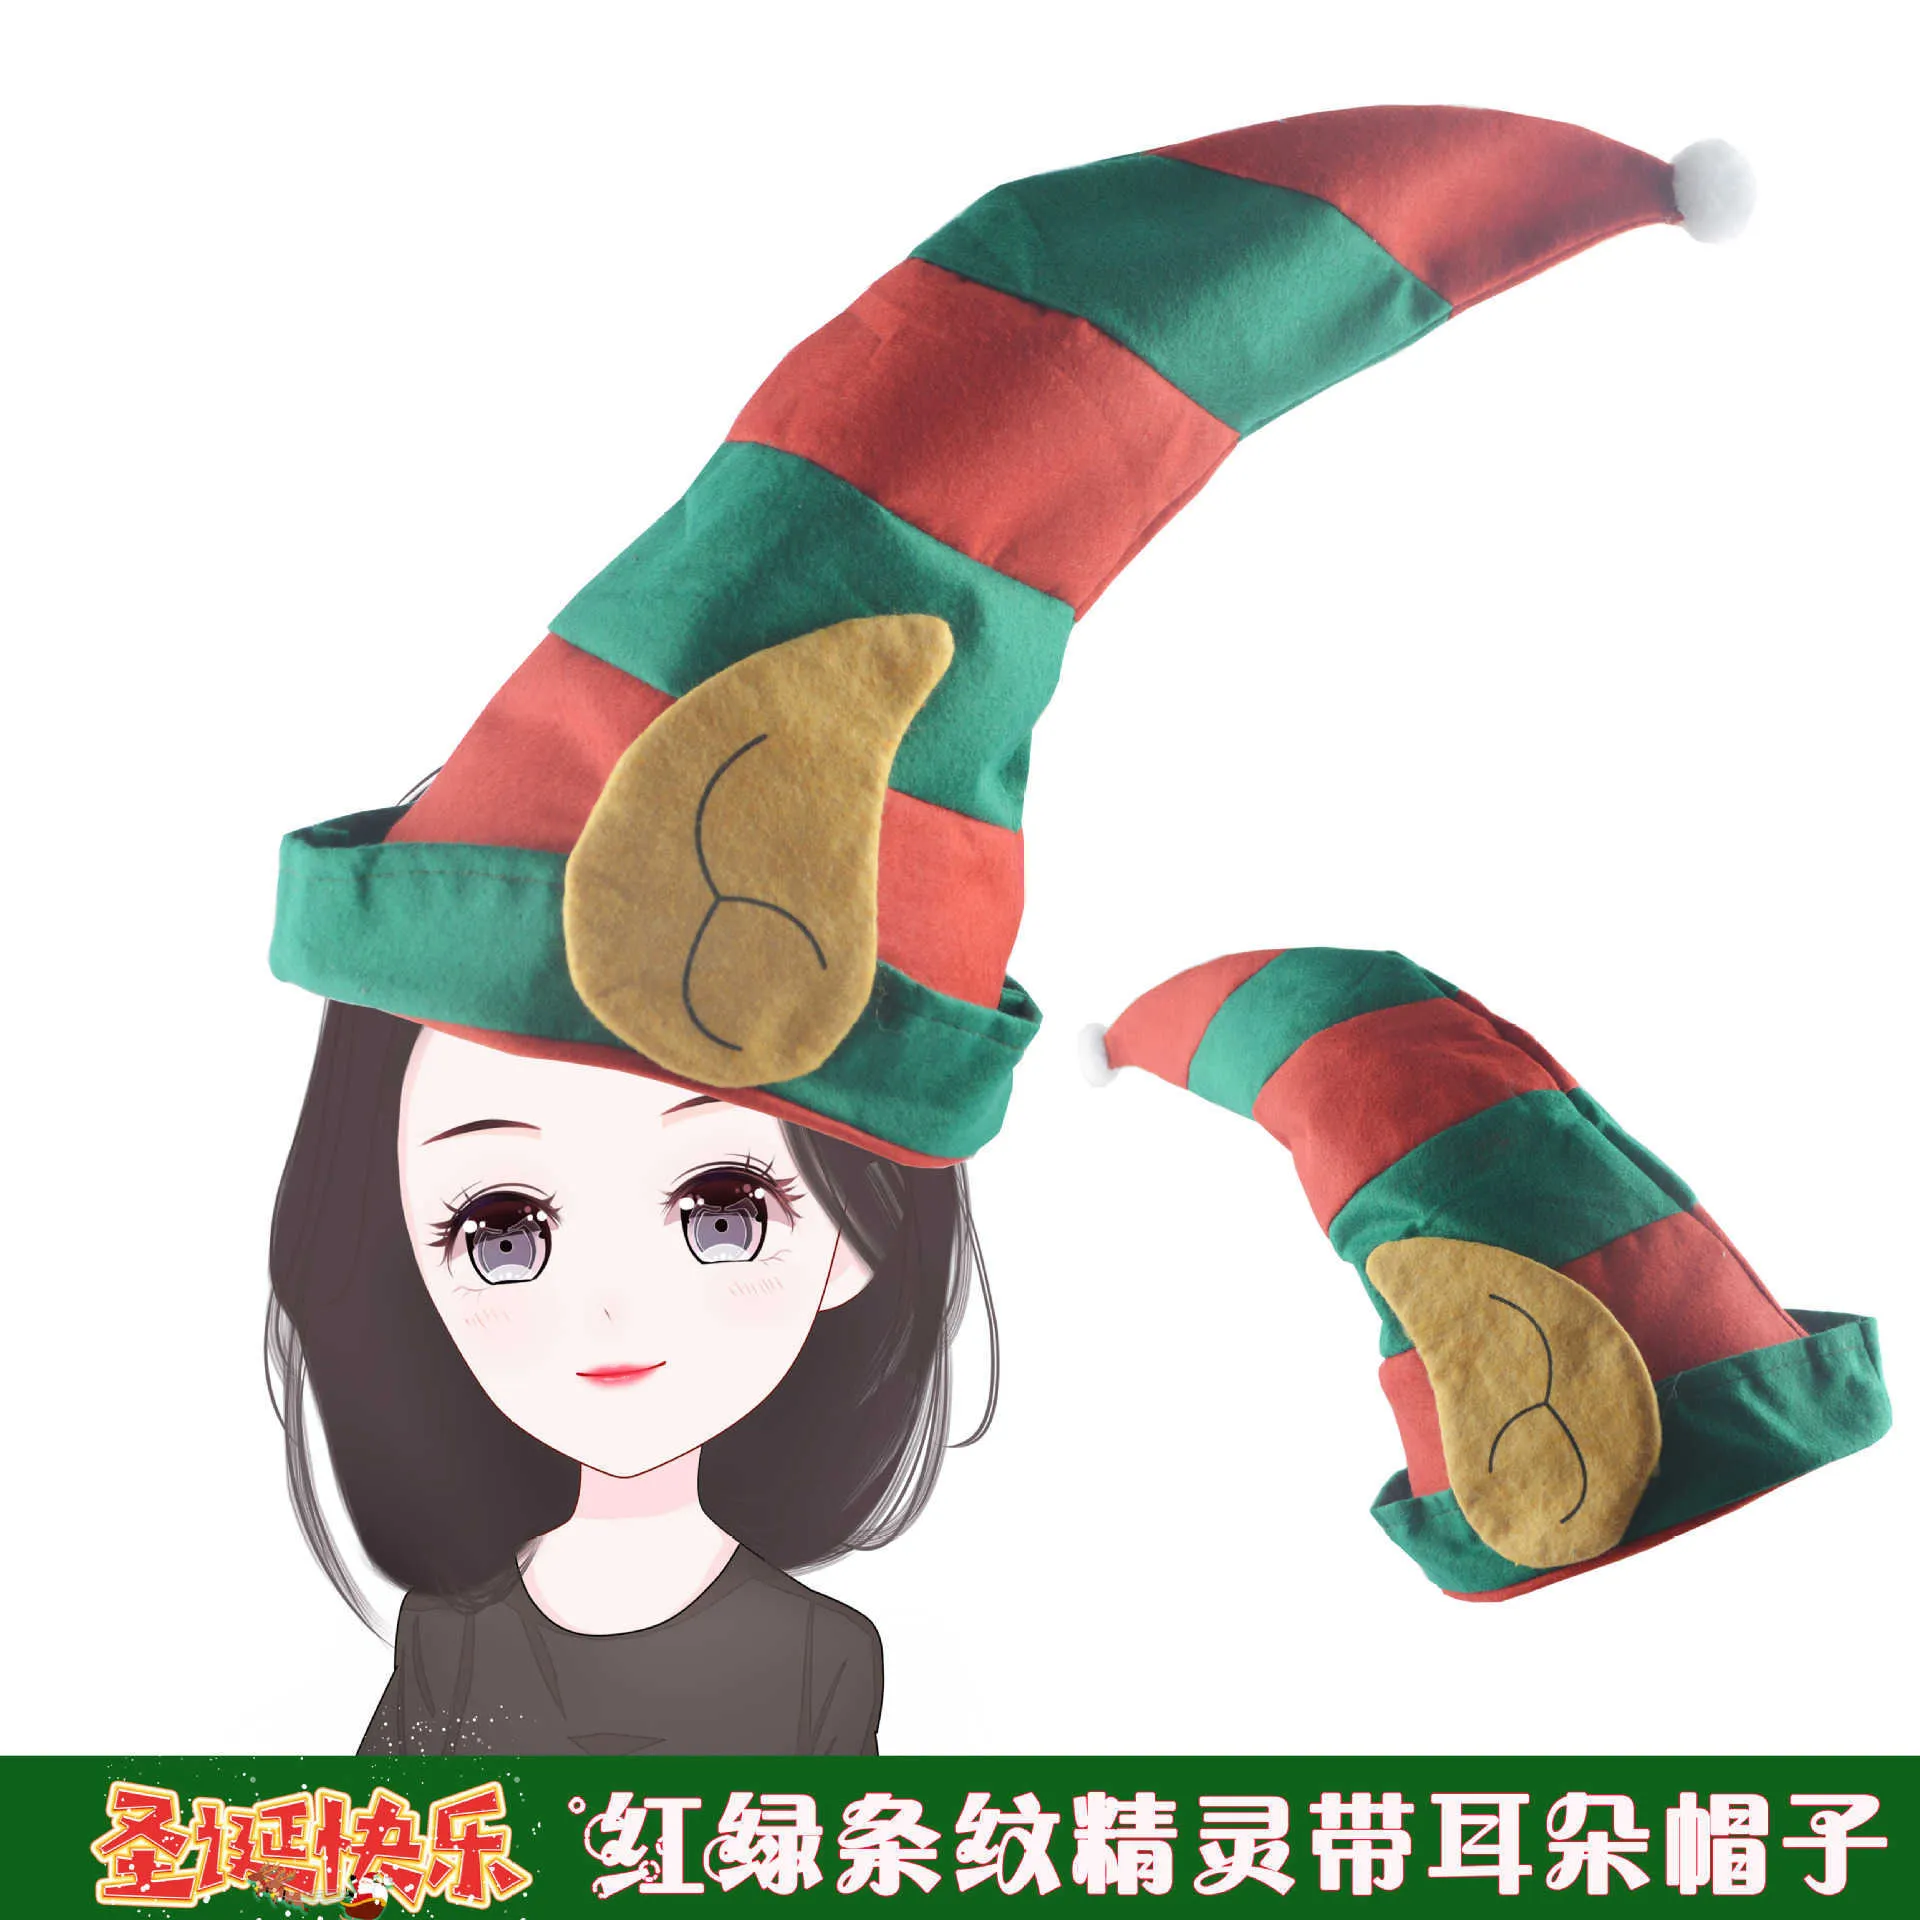 Elf Christmas hat elf hat clown hat ear red and green striped hat Christmas party decorations